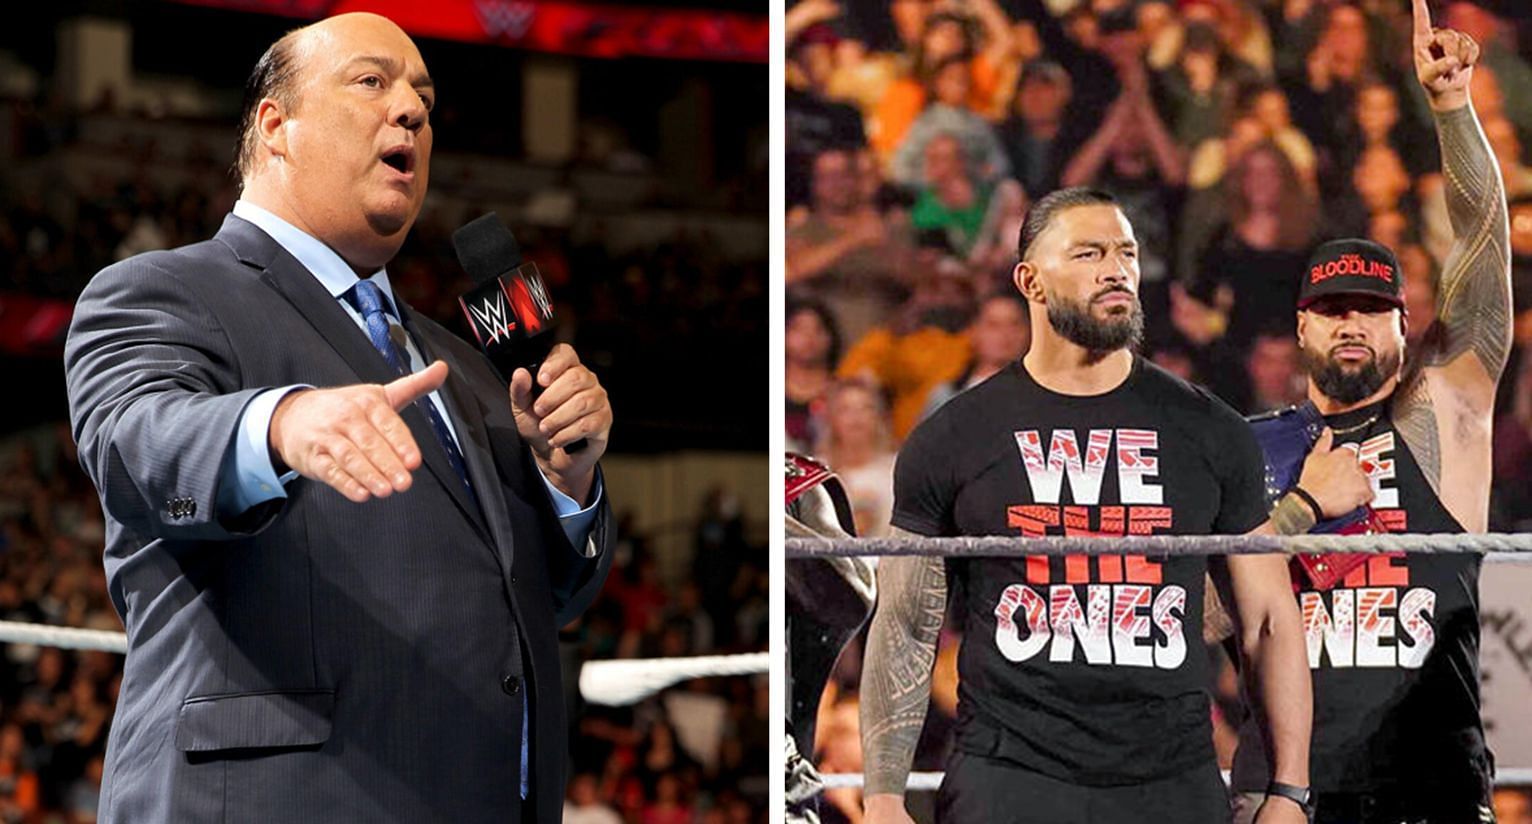 Paul Heyman could have been recruited